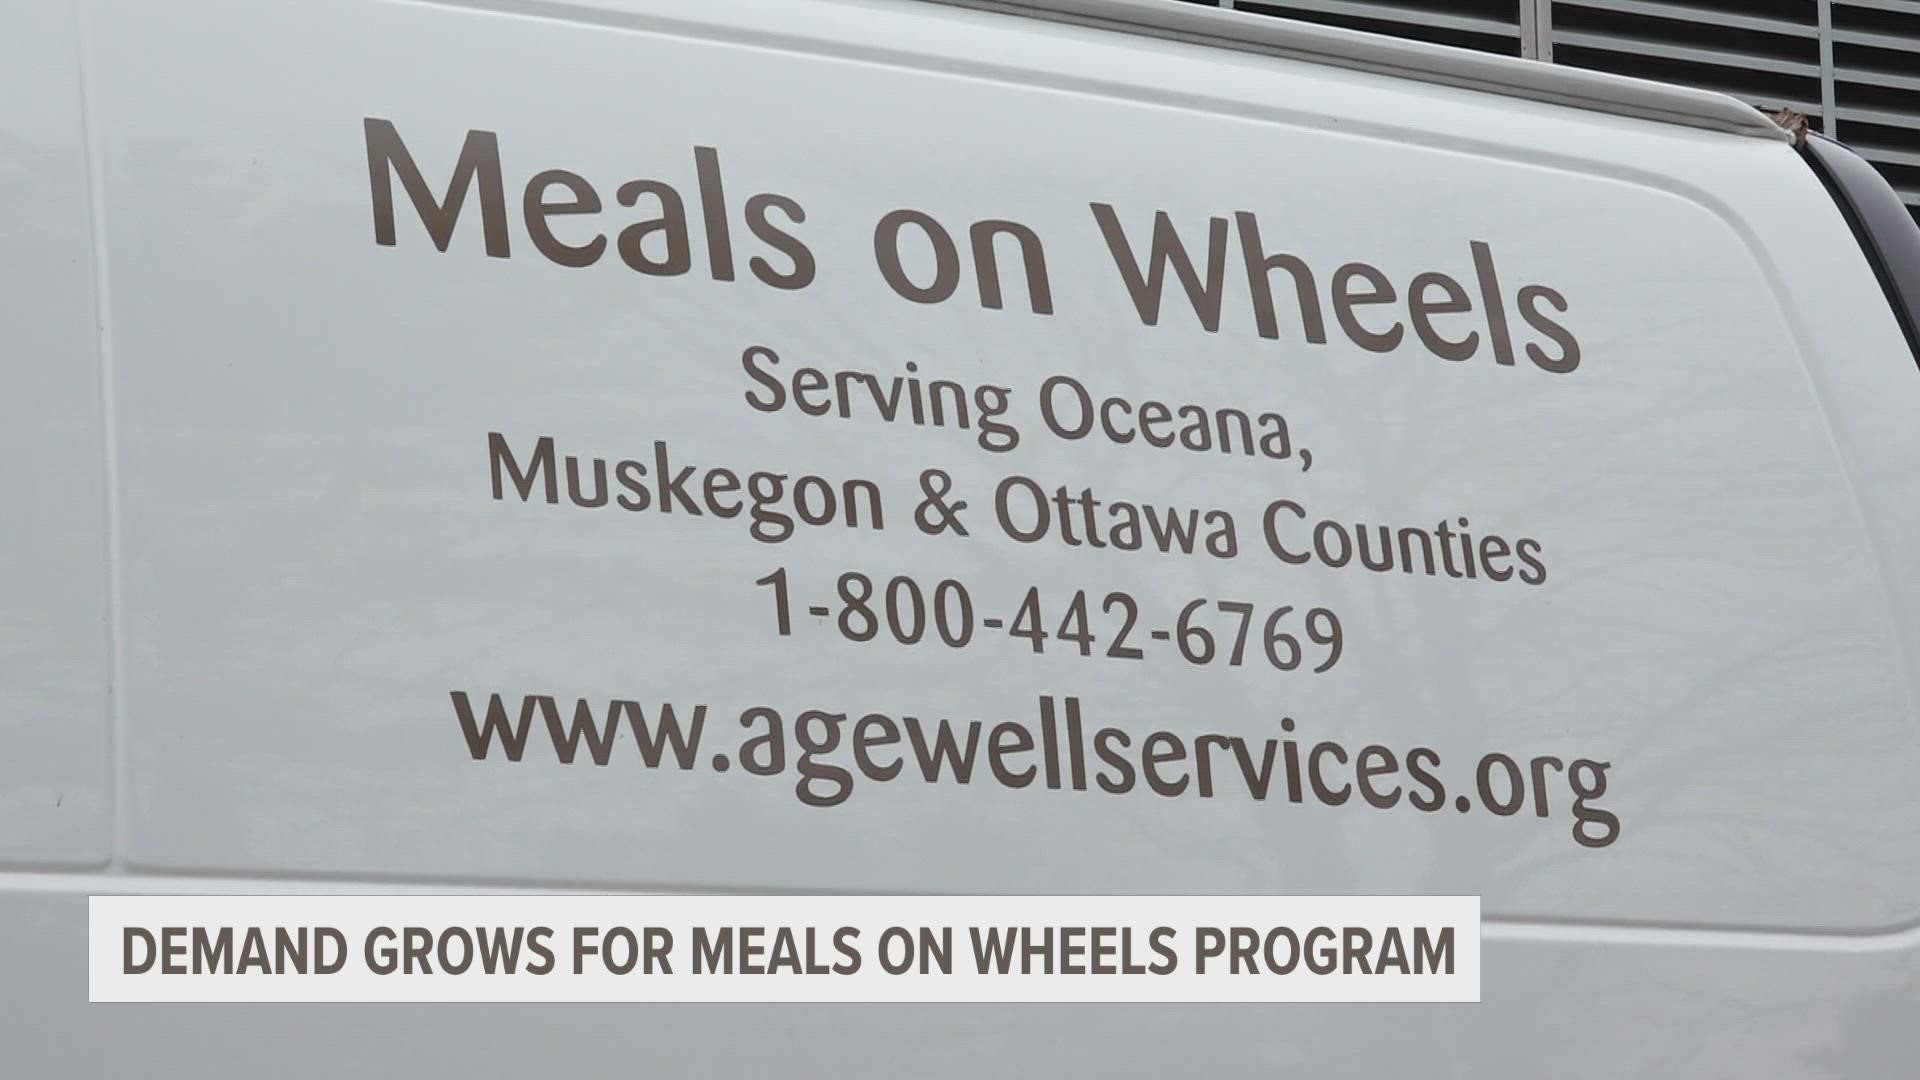 Meals on Wheels gives nutritious home-delivered food to the elderly and disabled in West Michigan.